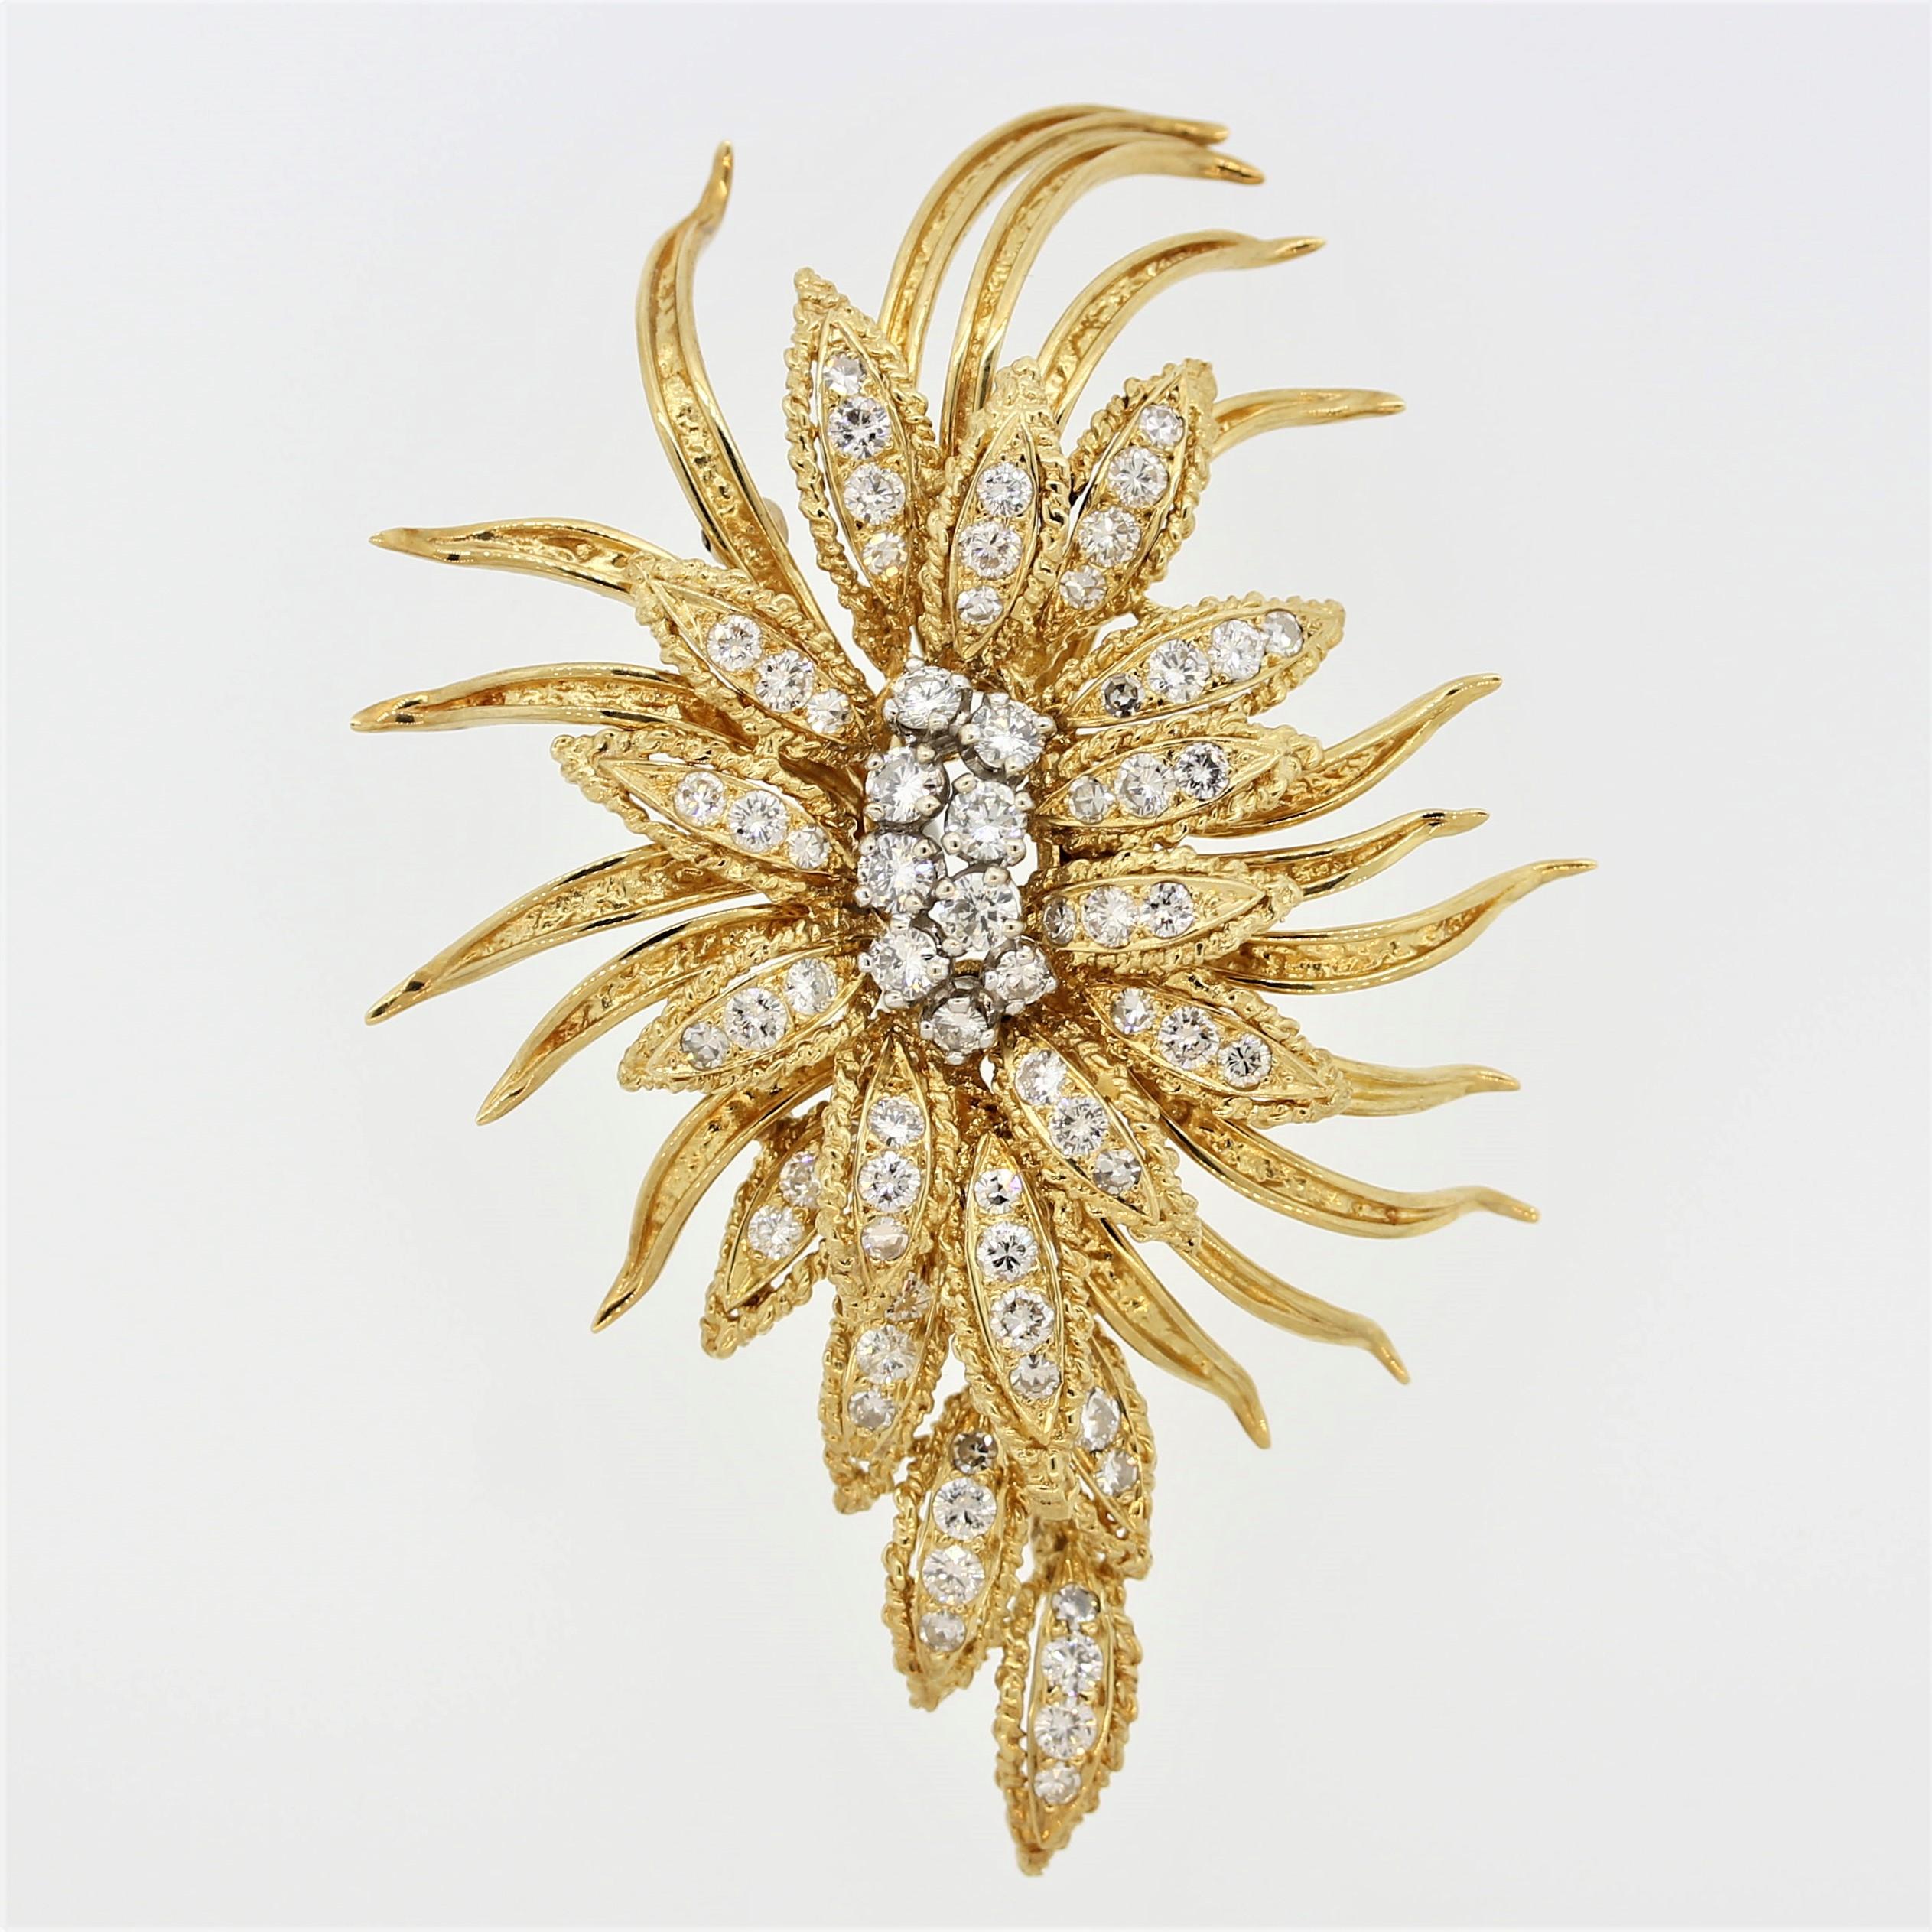 A classic diamond spray brooch from famed designer Hammerman. It features 3.50 carats of extra fine round brilliant cut diamonds which are set over a floral motif. The spray design adds dimension and style to this unique brooch. Made in 18k yellow